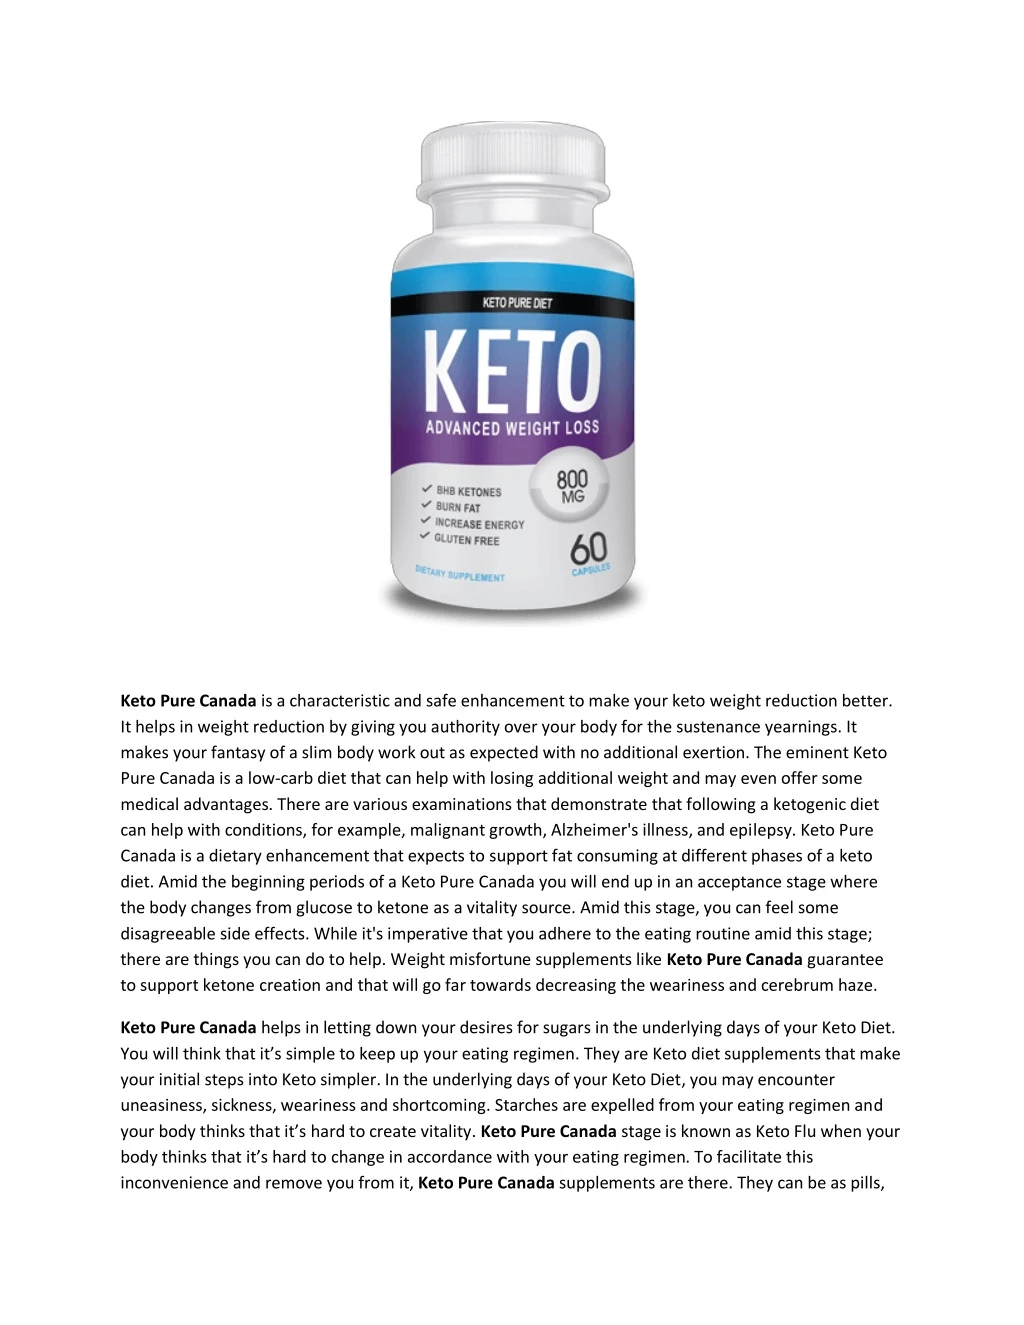 keto pure canada is a characteristic and safe n.